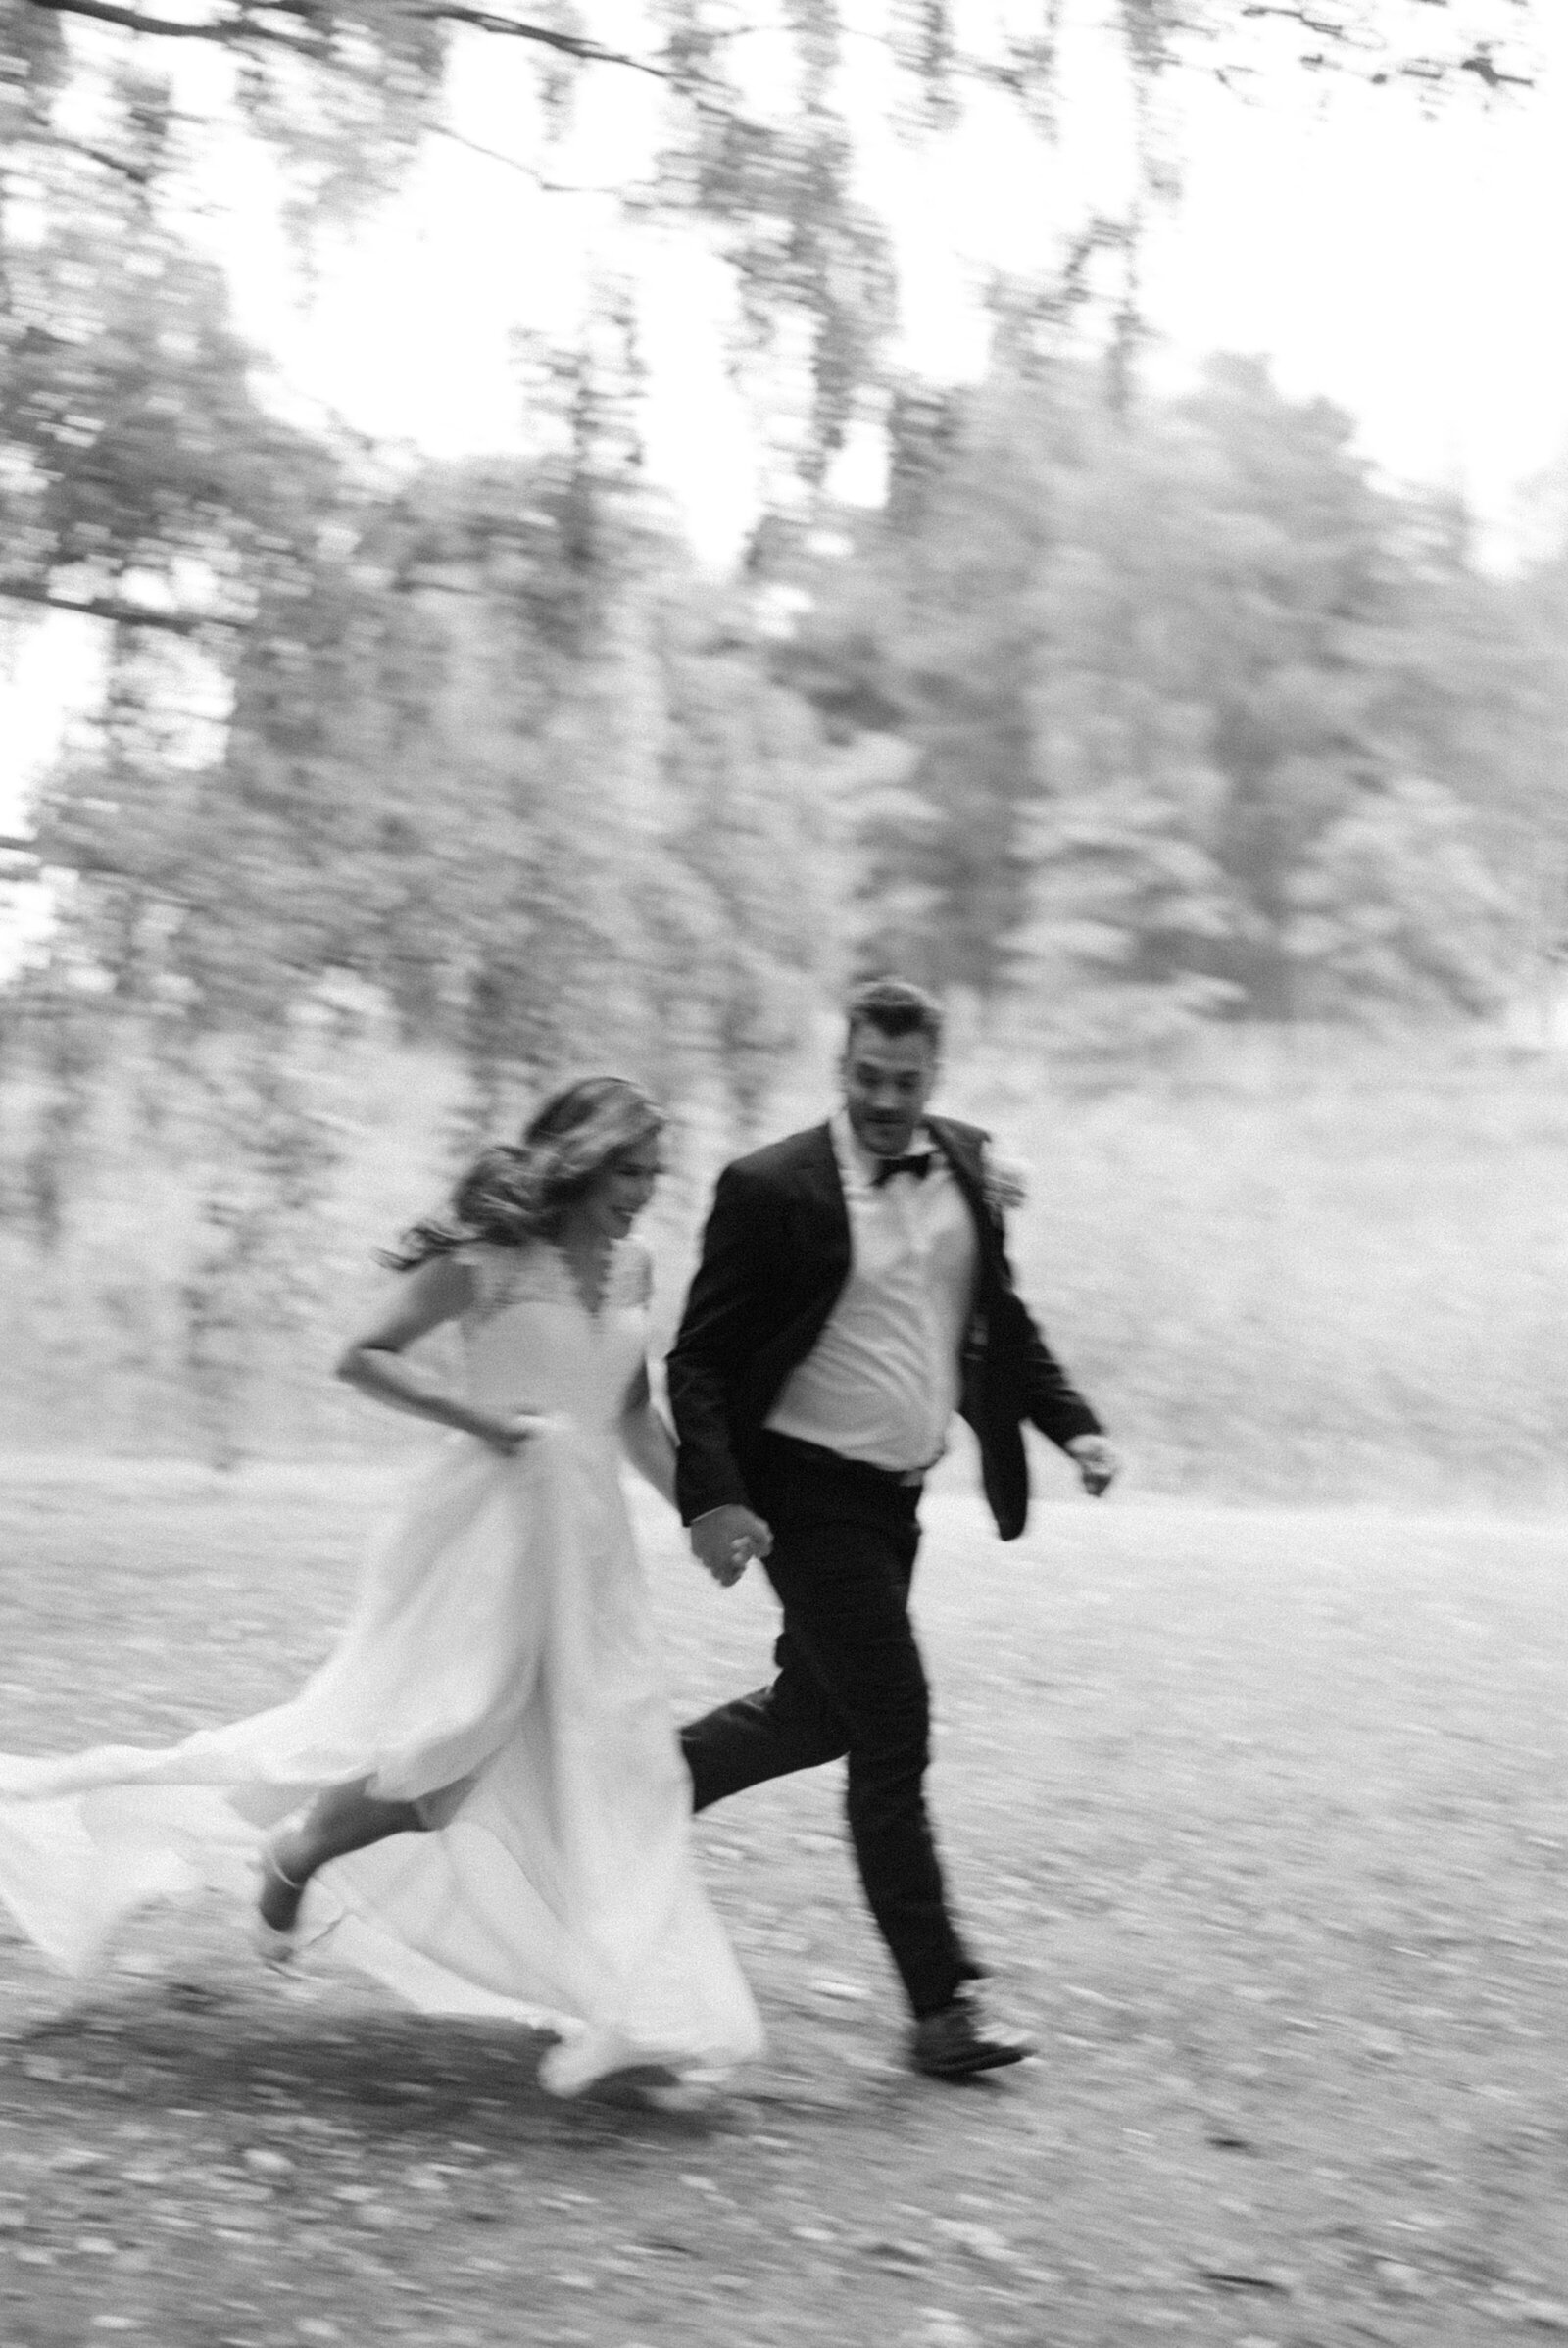 Bride running in her wedding dress and high heels  and holding hands with the groom during their wedding photography session with photographer Hannika Gabrielsson.